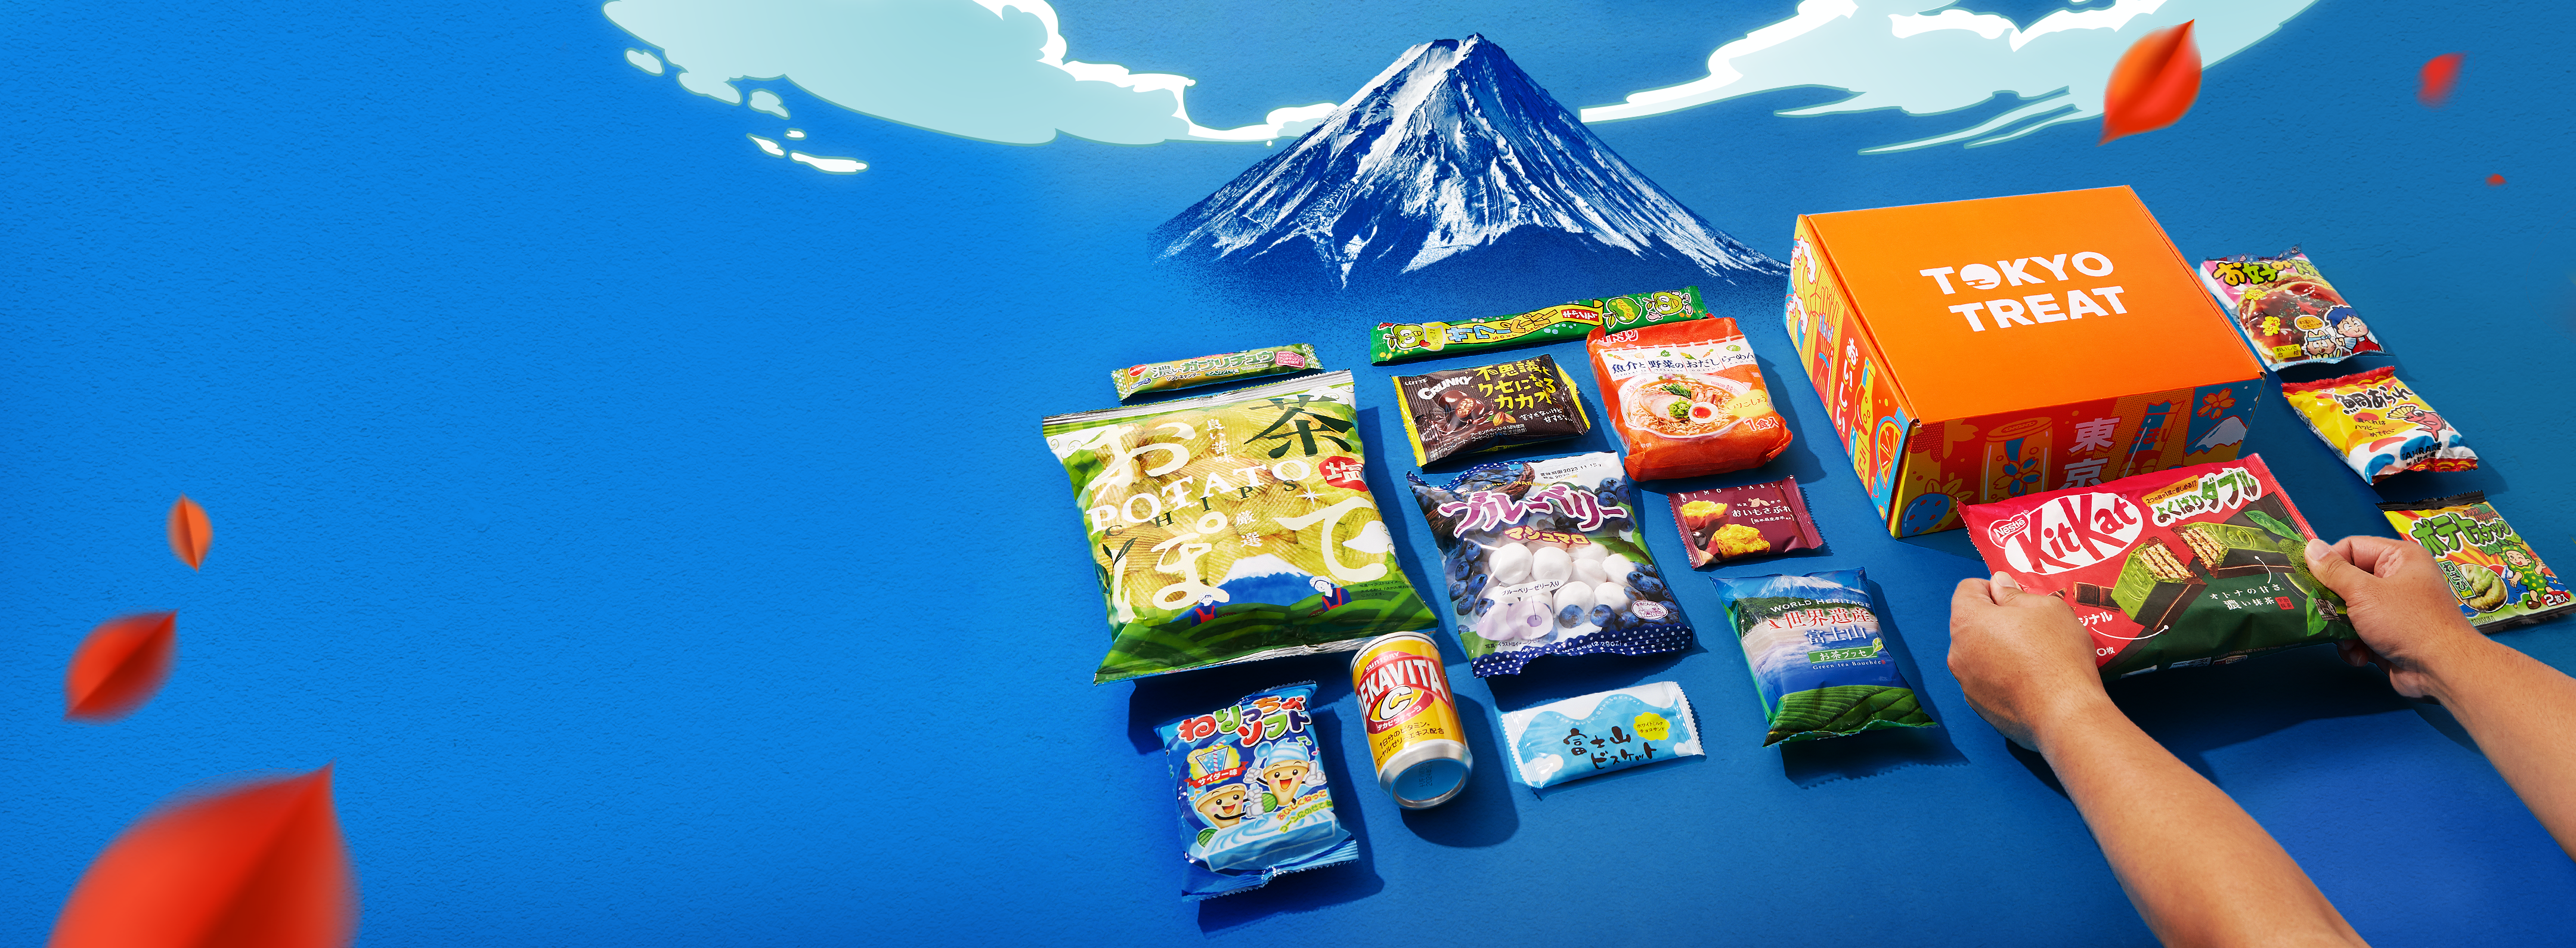 The TokyoTreat box sits against a sky blue background with Japan's Mt. Fuji in the background.